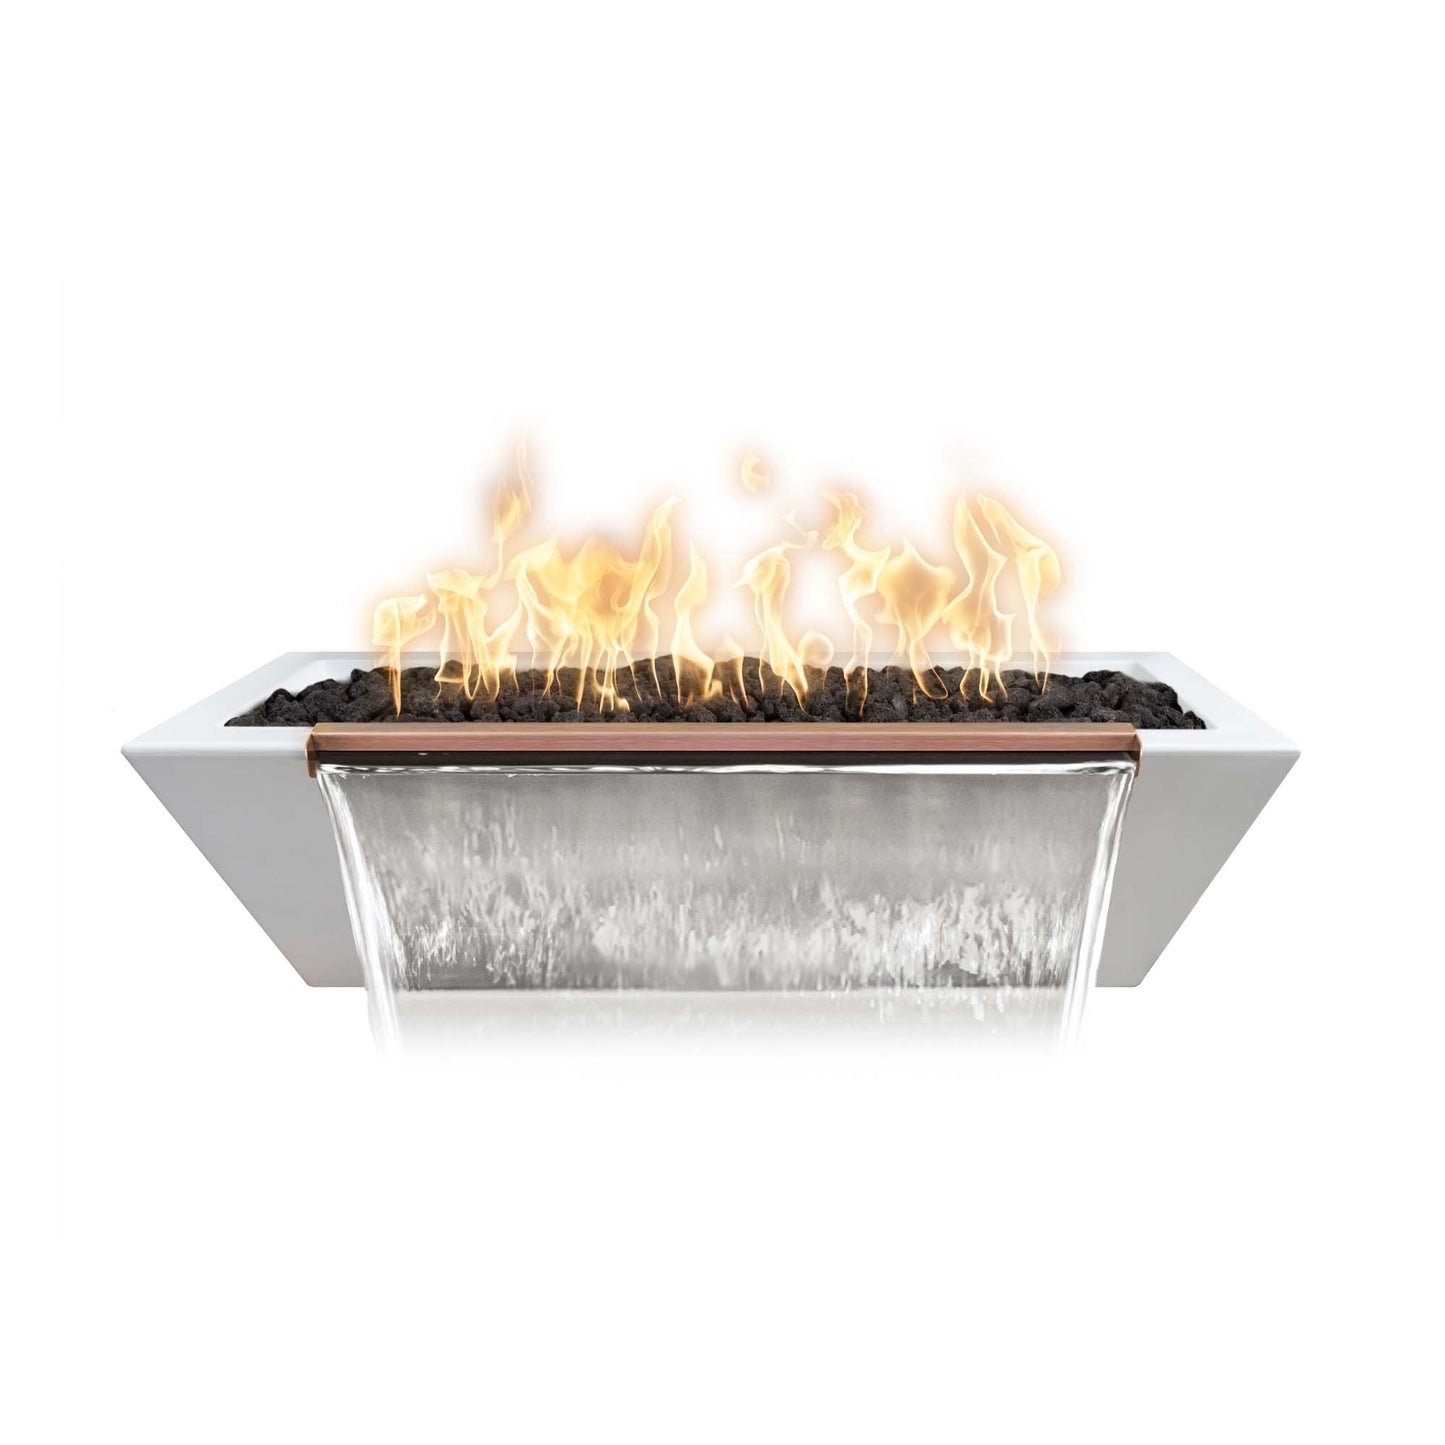 The Outdoor Plus Linear Maya 72" Metallic Silver GFRC Concrete Liquid Propane Fire & Water Bowl with 12V Electronic Ignition